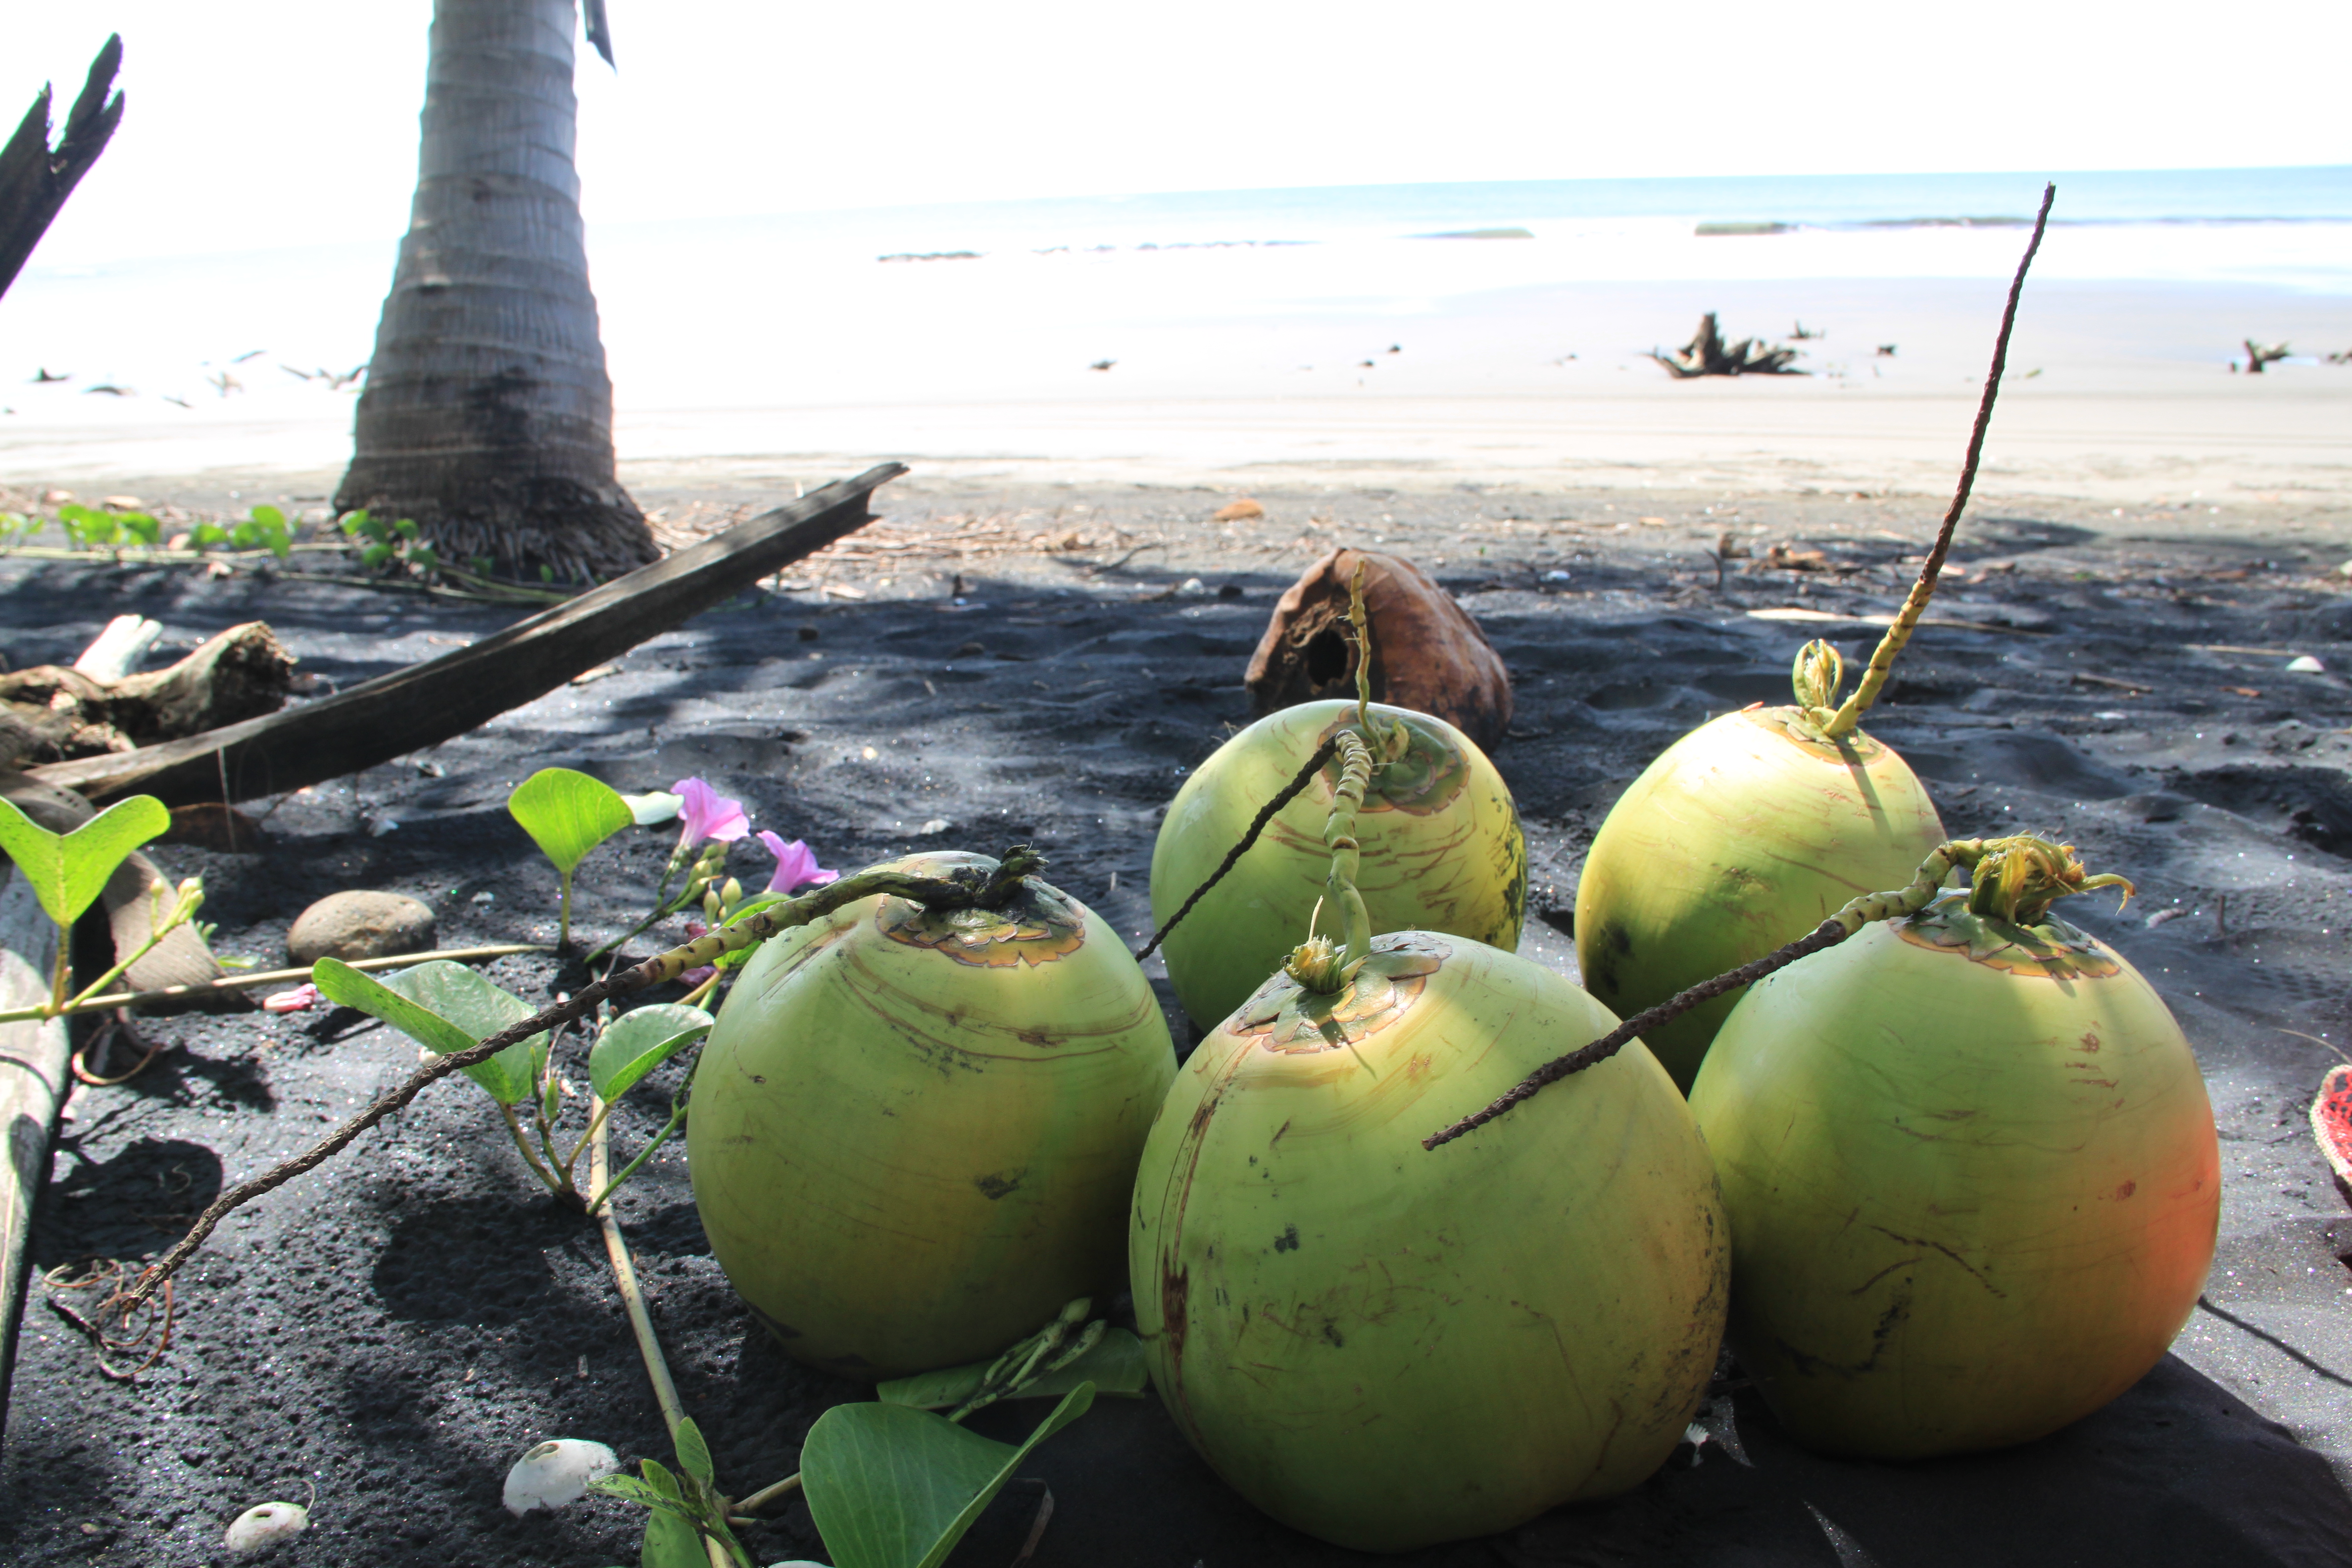 Young cocos await their fate on a black sand beach in Nicaragua.